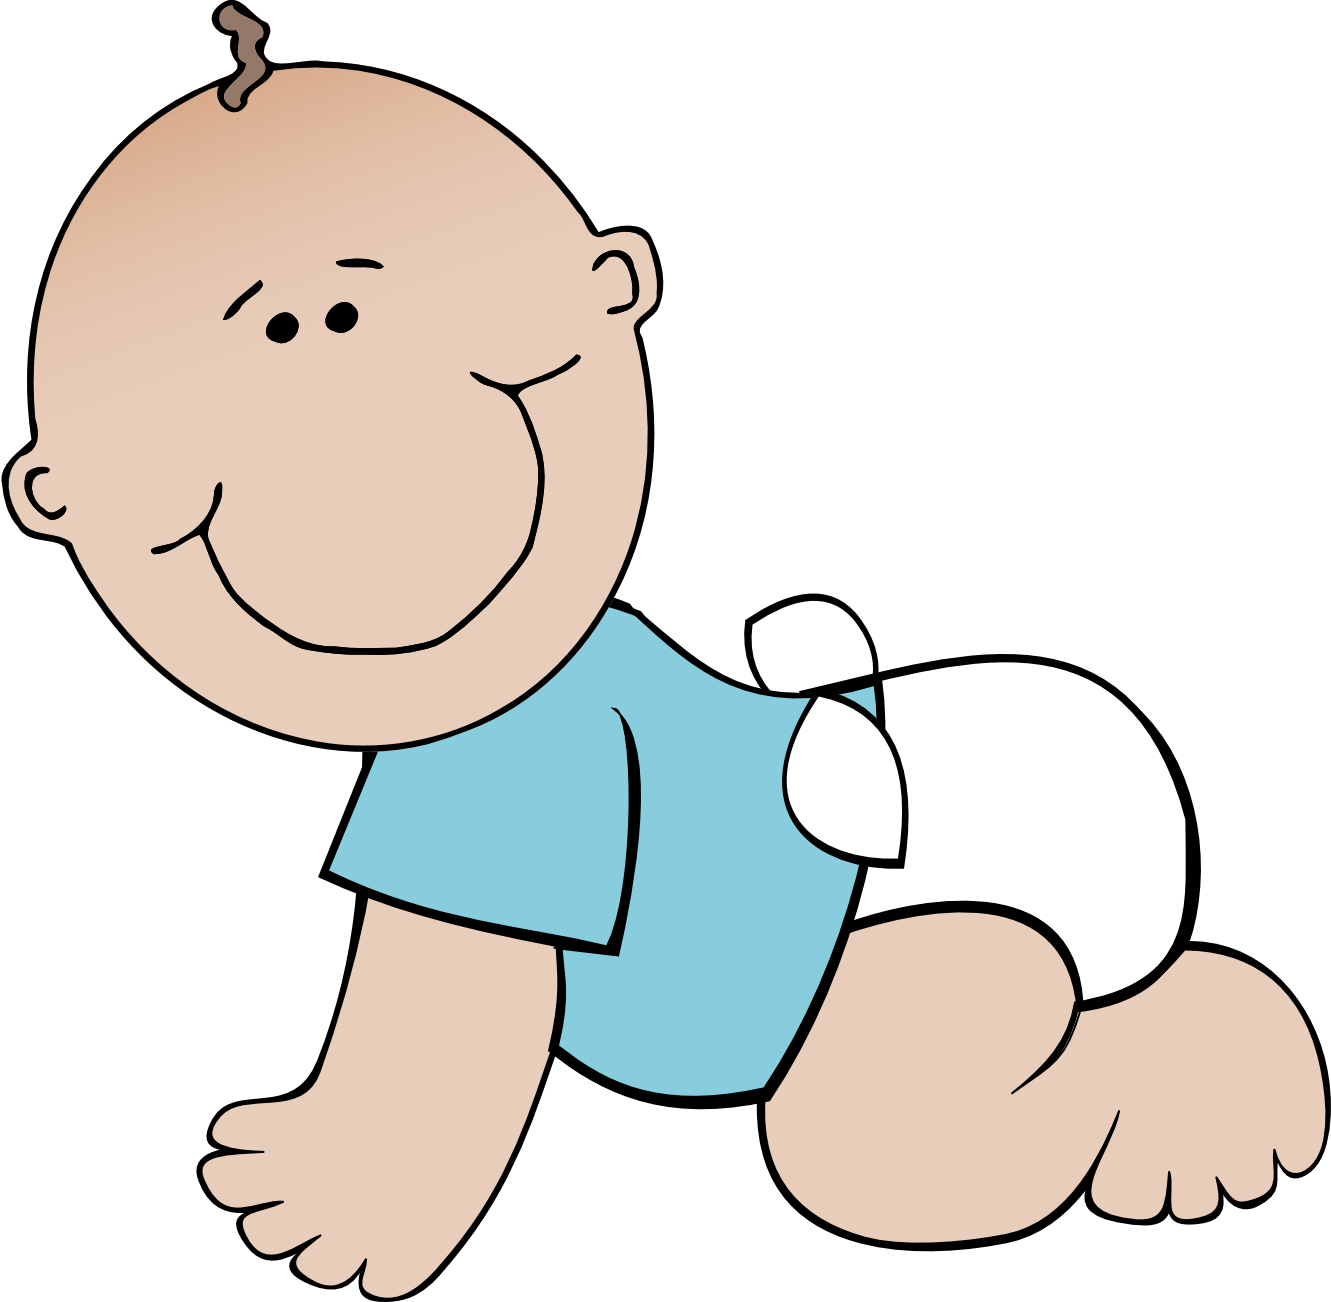 Baby images clip art